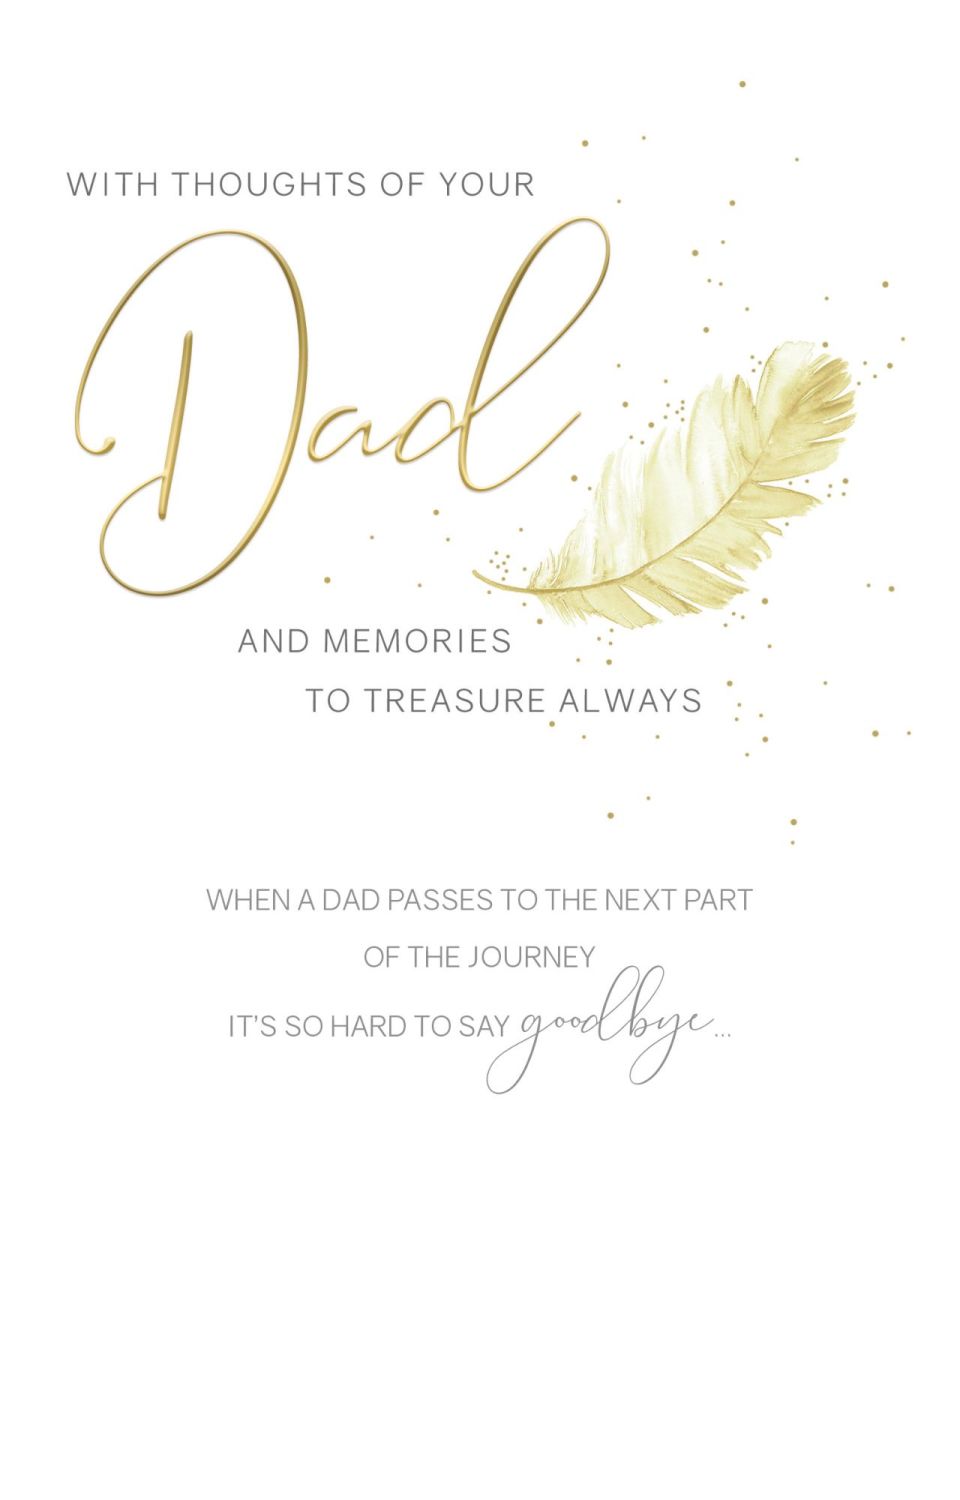 With Thoughts Of Your Dad - LOSS Of DAD Card - BEAUTIFUL Gold Foil BEREAVEM